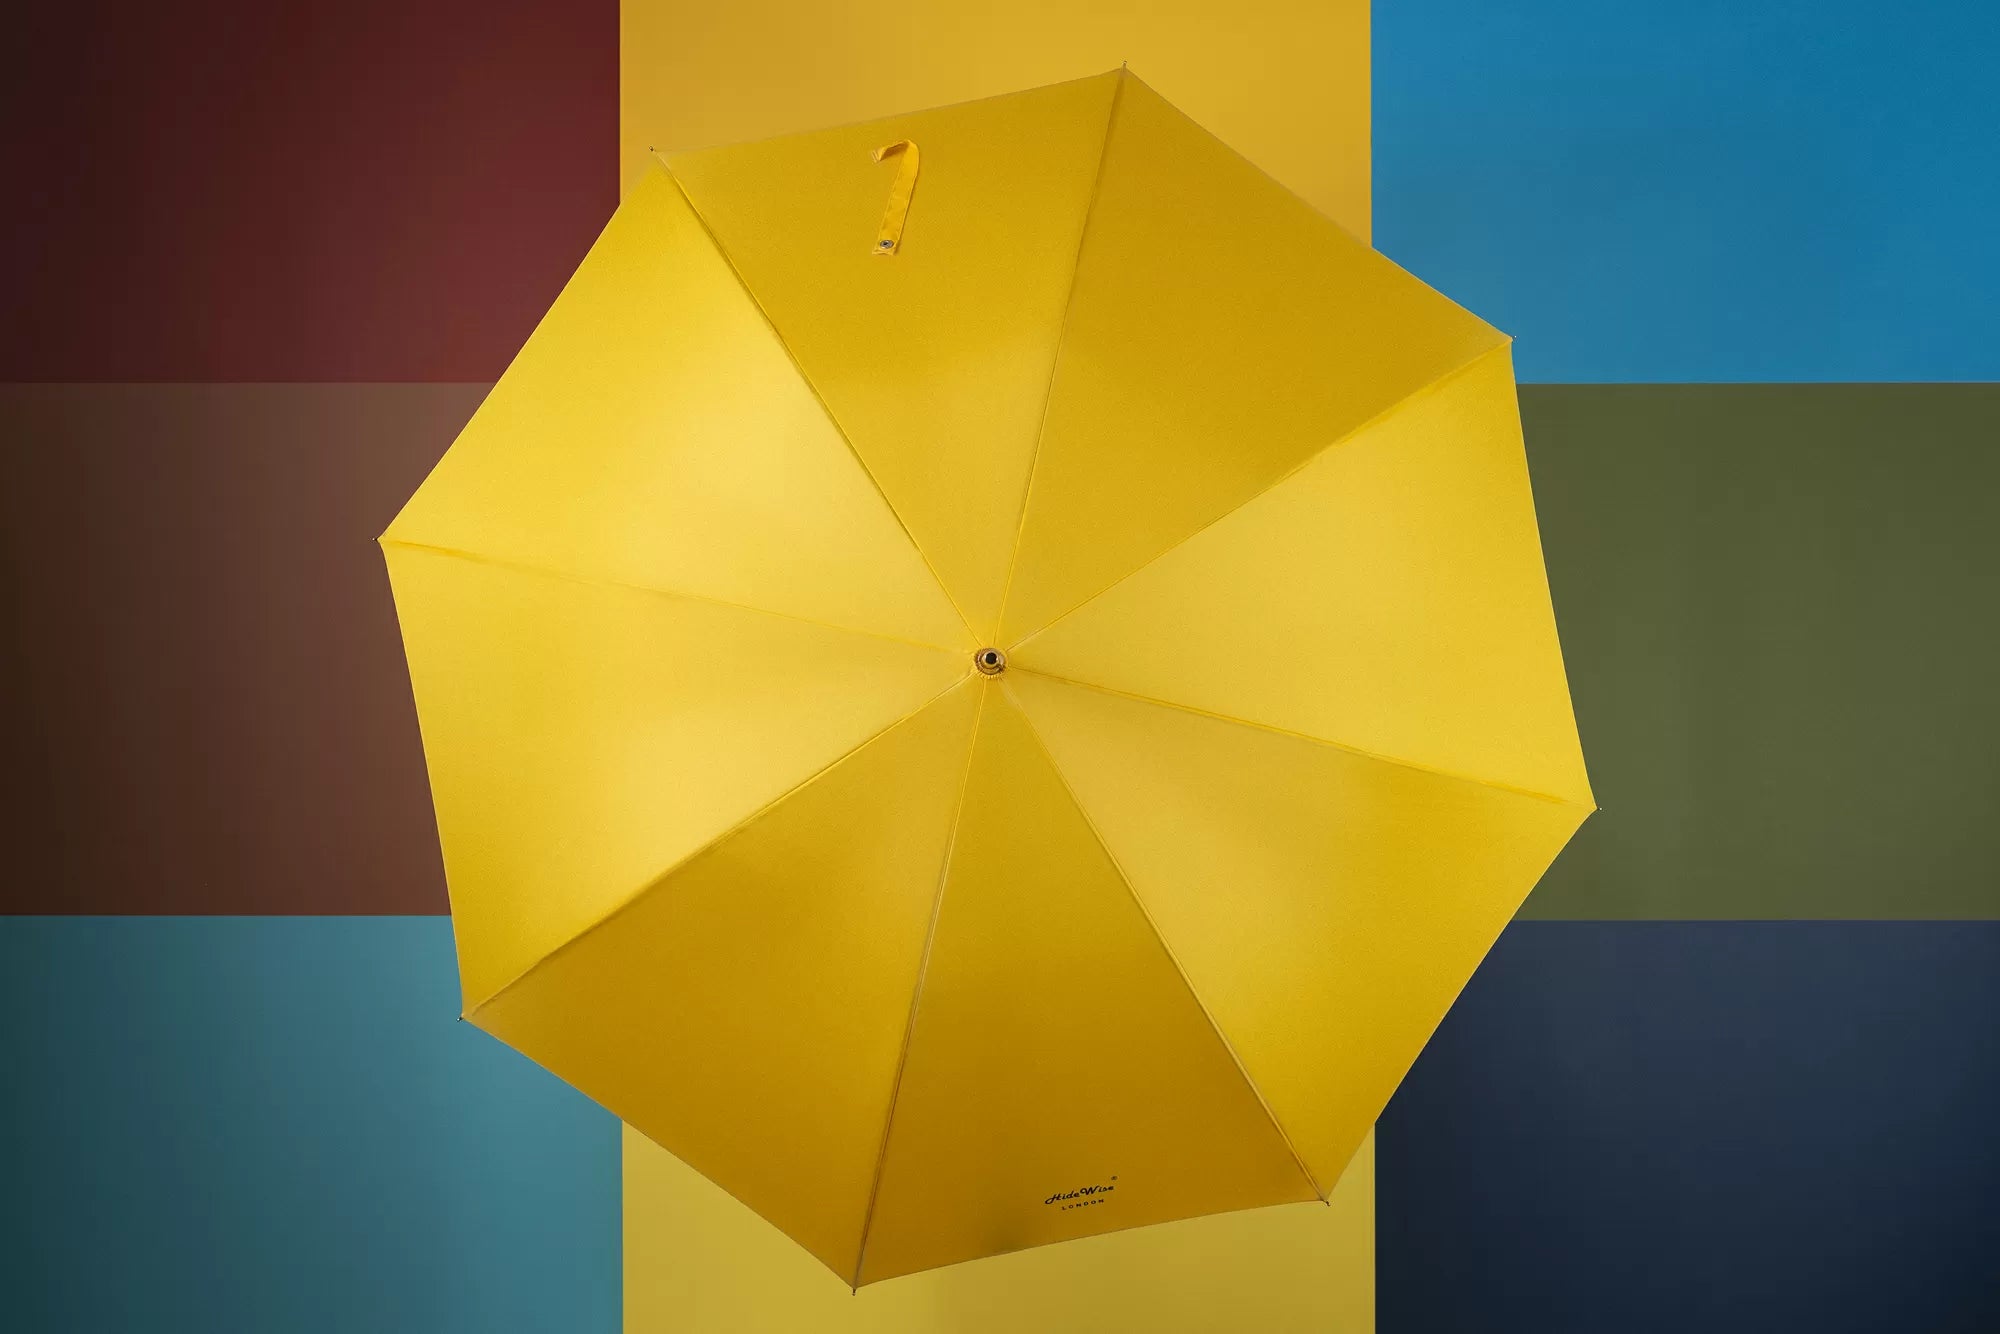 hidewise-london-umbrella-wooden-J-handle-strong-premium-quality-brolly-yellow-gust-proof-gustproof-automatic-straight-golf